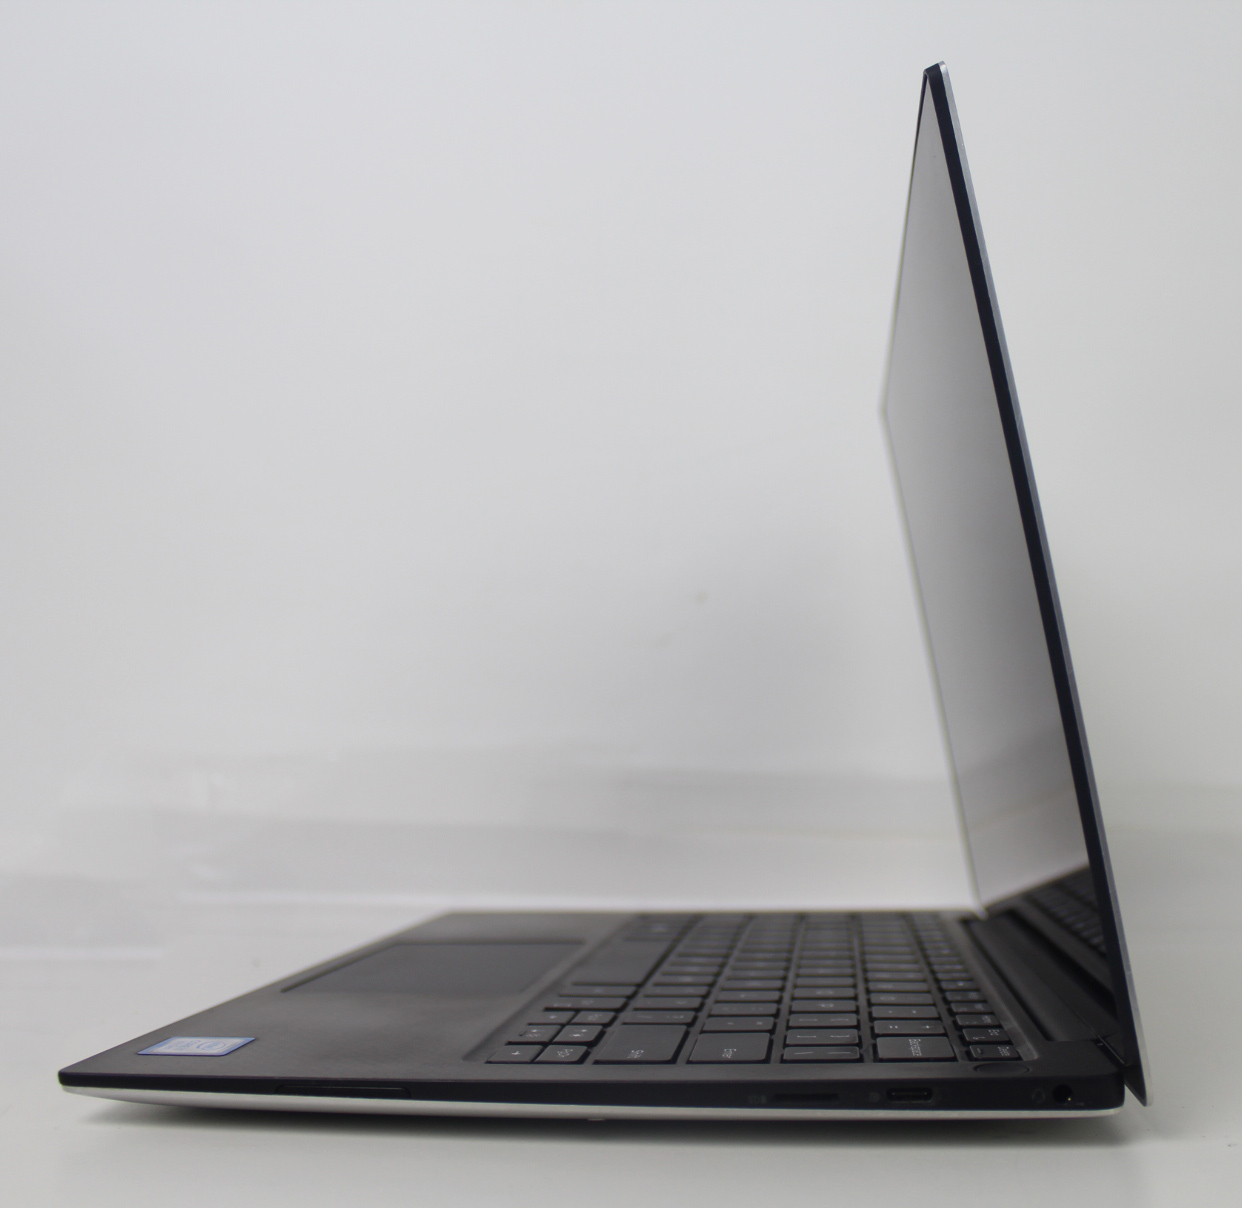 NOTEBOOK PROFISSIONAL DELL XPS 9370 13.3" CORE I7 16GB SSD - 512GB + TOUCHSCREEN - 4K